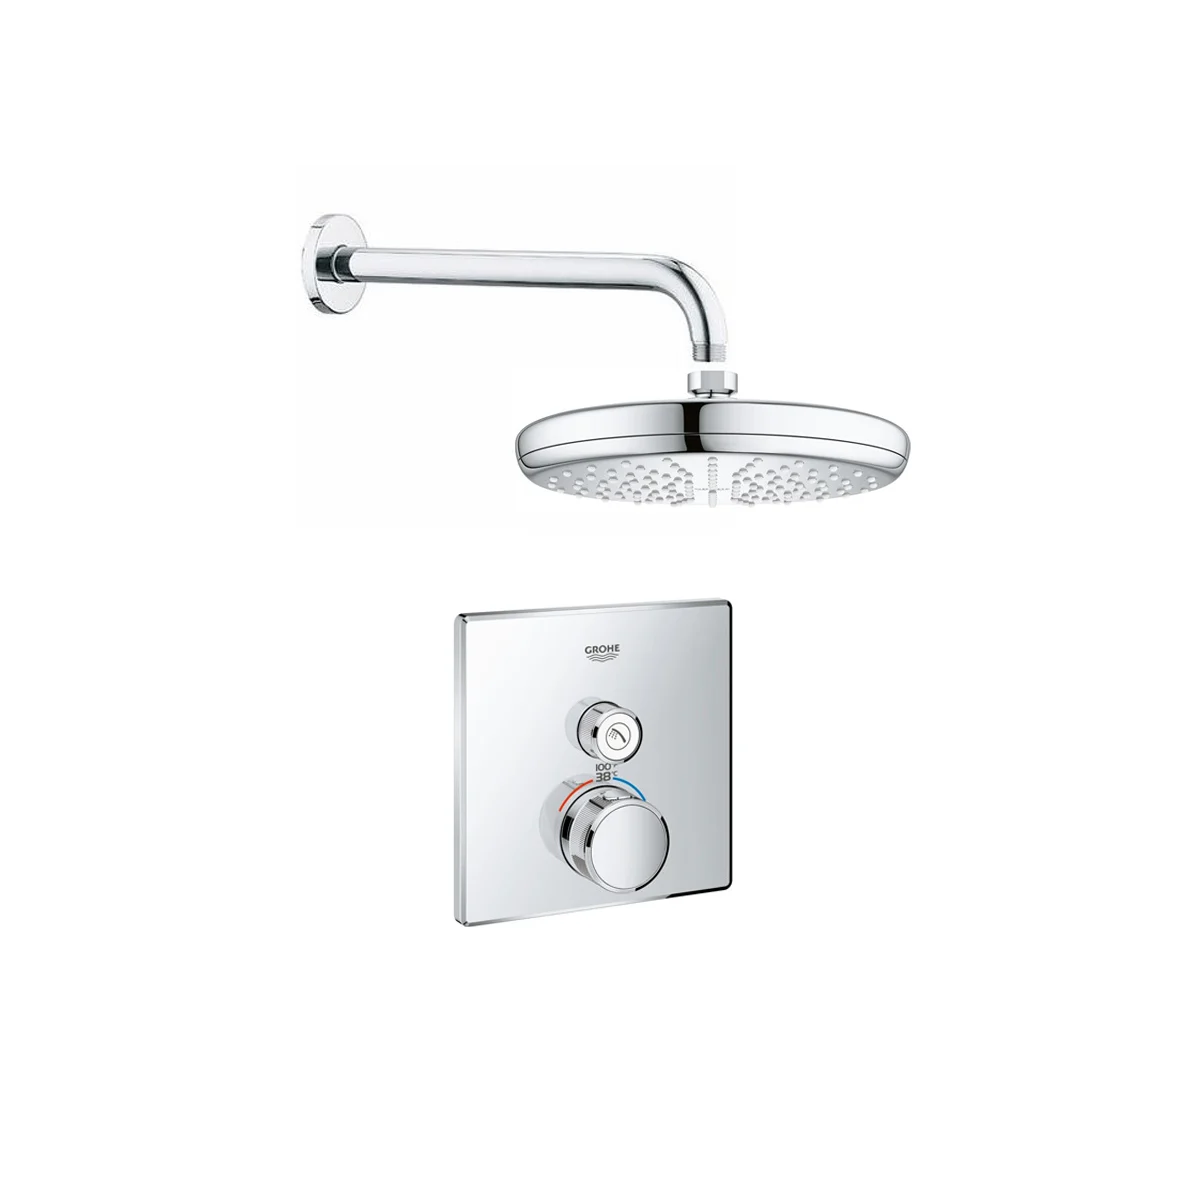 grohe gss grohtherm sq 02 00a 7109186 1 Taps Depot Ltd.